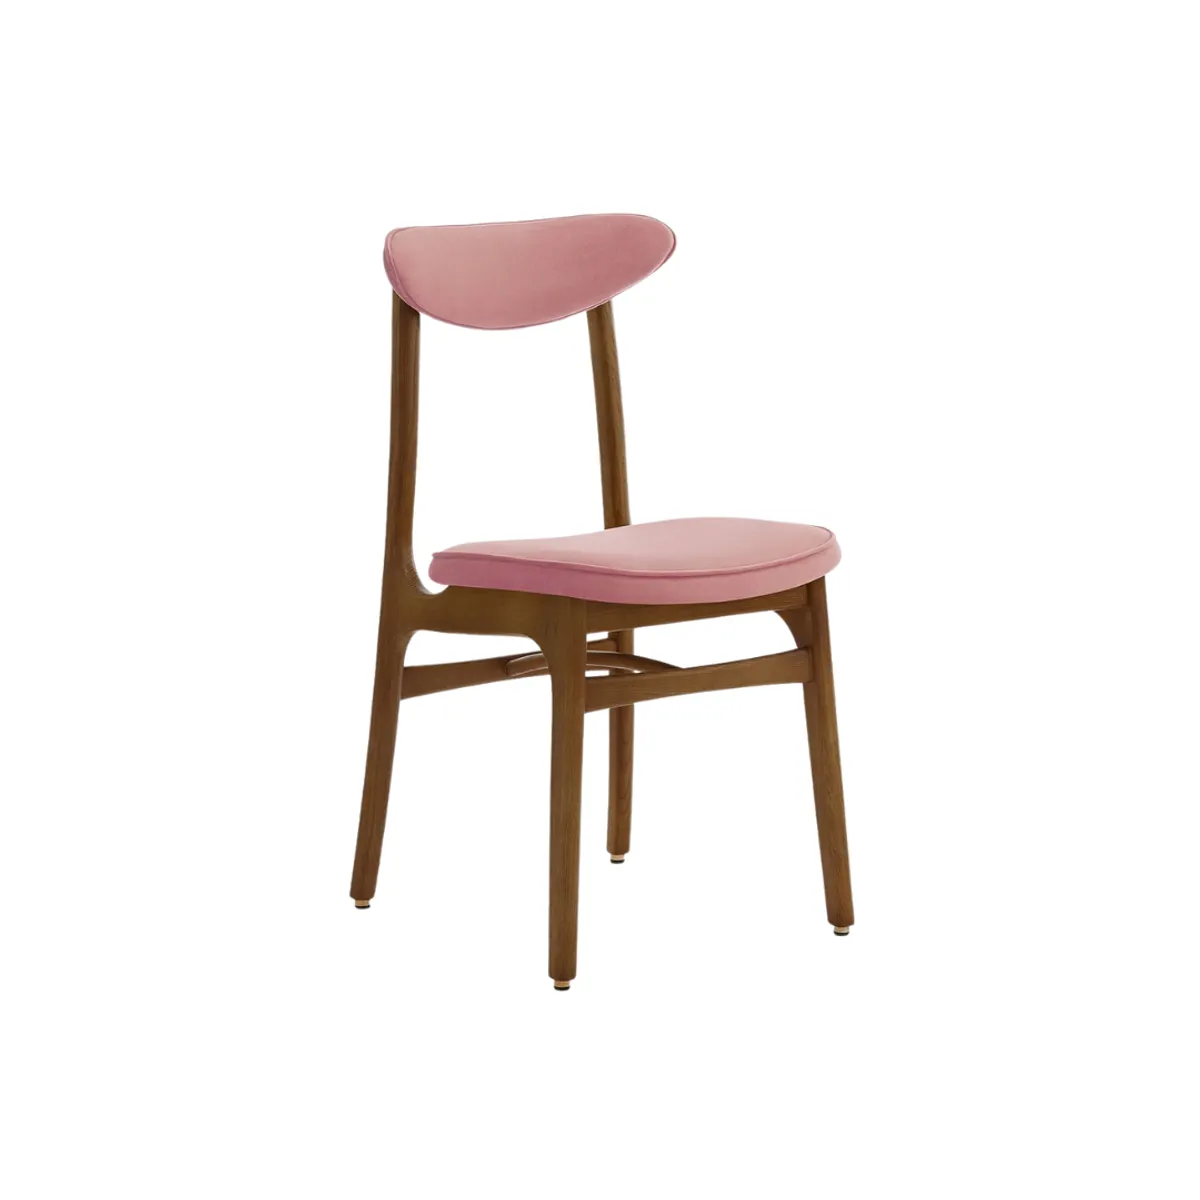 200-190 side chair 2